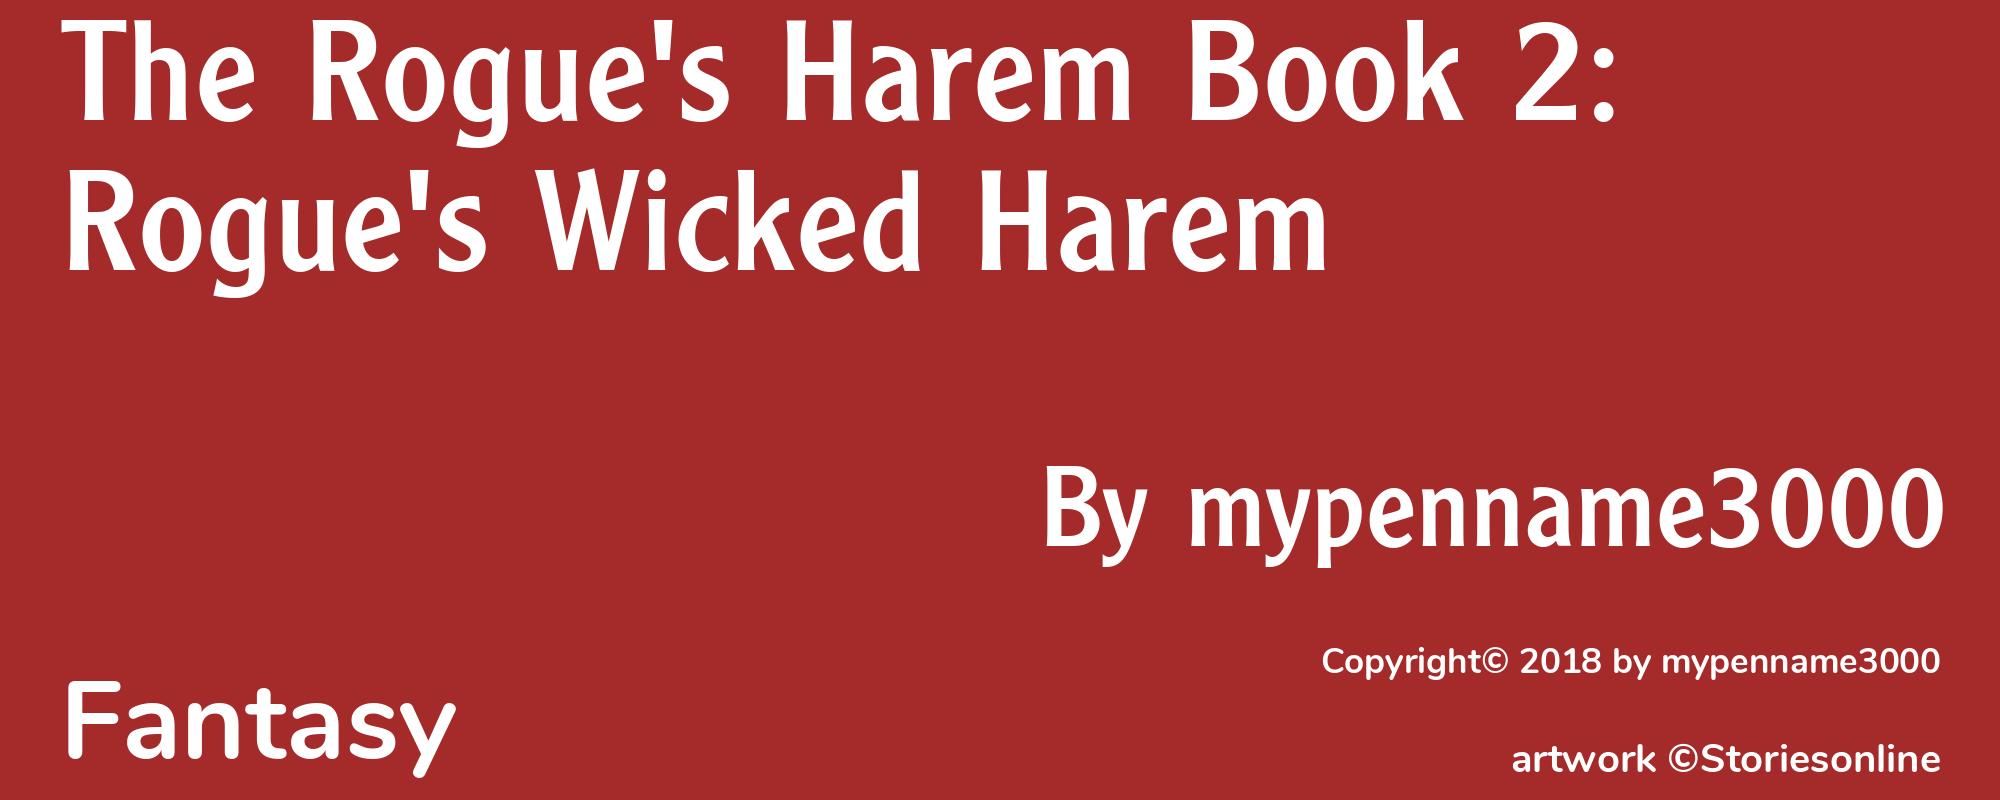 The Rogue's Harem Book 2: Rogue's Wicked Harem - Cover